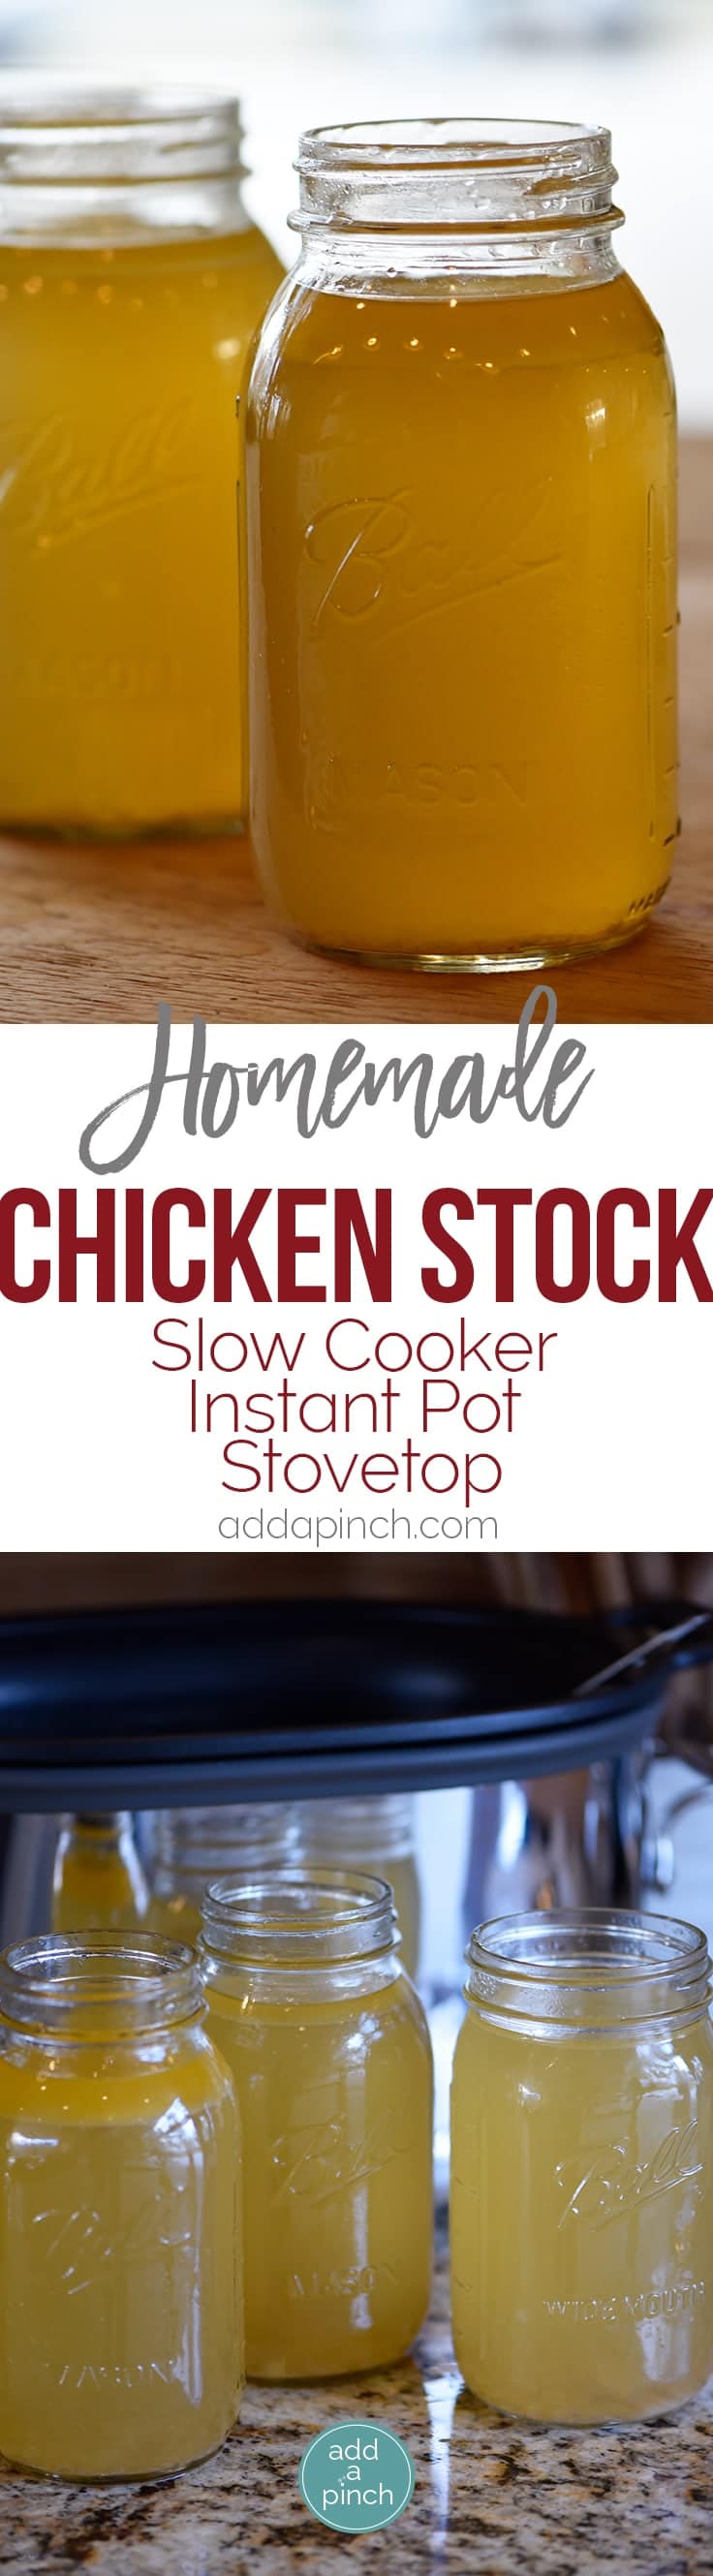 Homemade Chicken Stock Recipe - Learn how to make homemade chicken stock in just a few easy steps! Slow Cooker, Instant Pot and Stovetop Instructions included! // addapinch.com